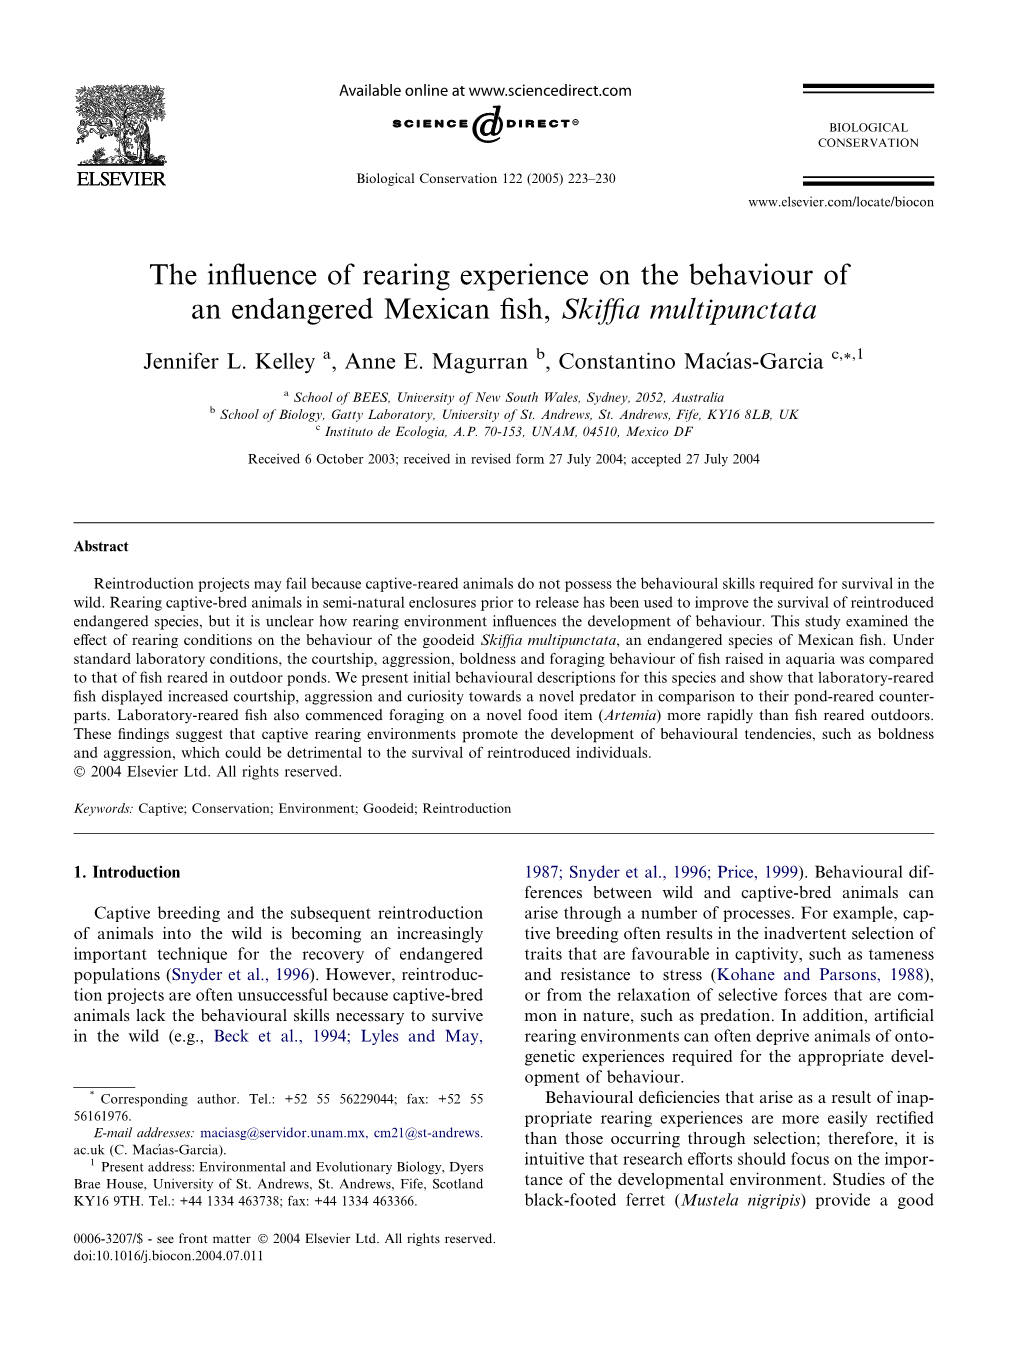 The Influence of Rearing Experience on the Behaviour of an Endangered